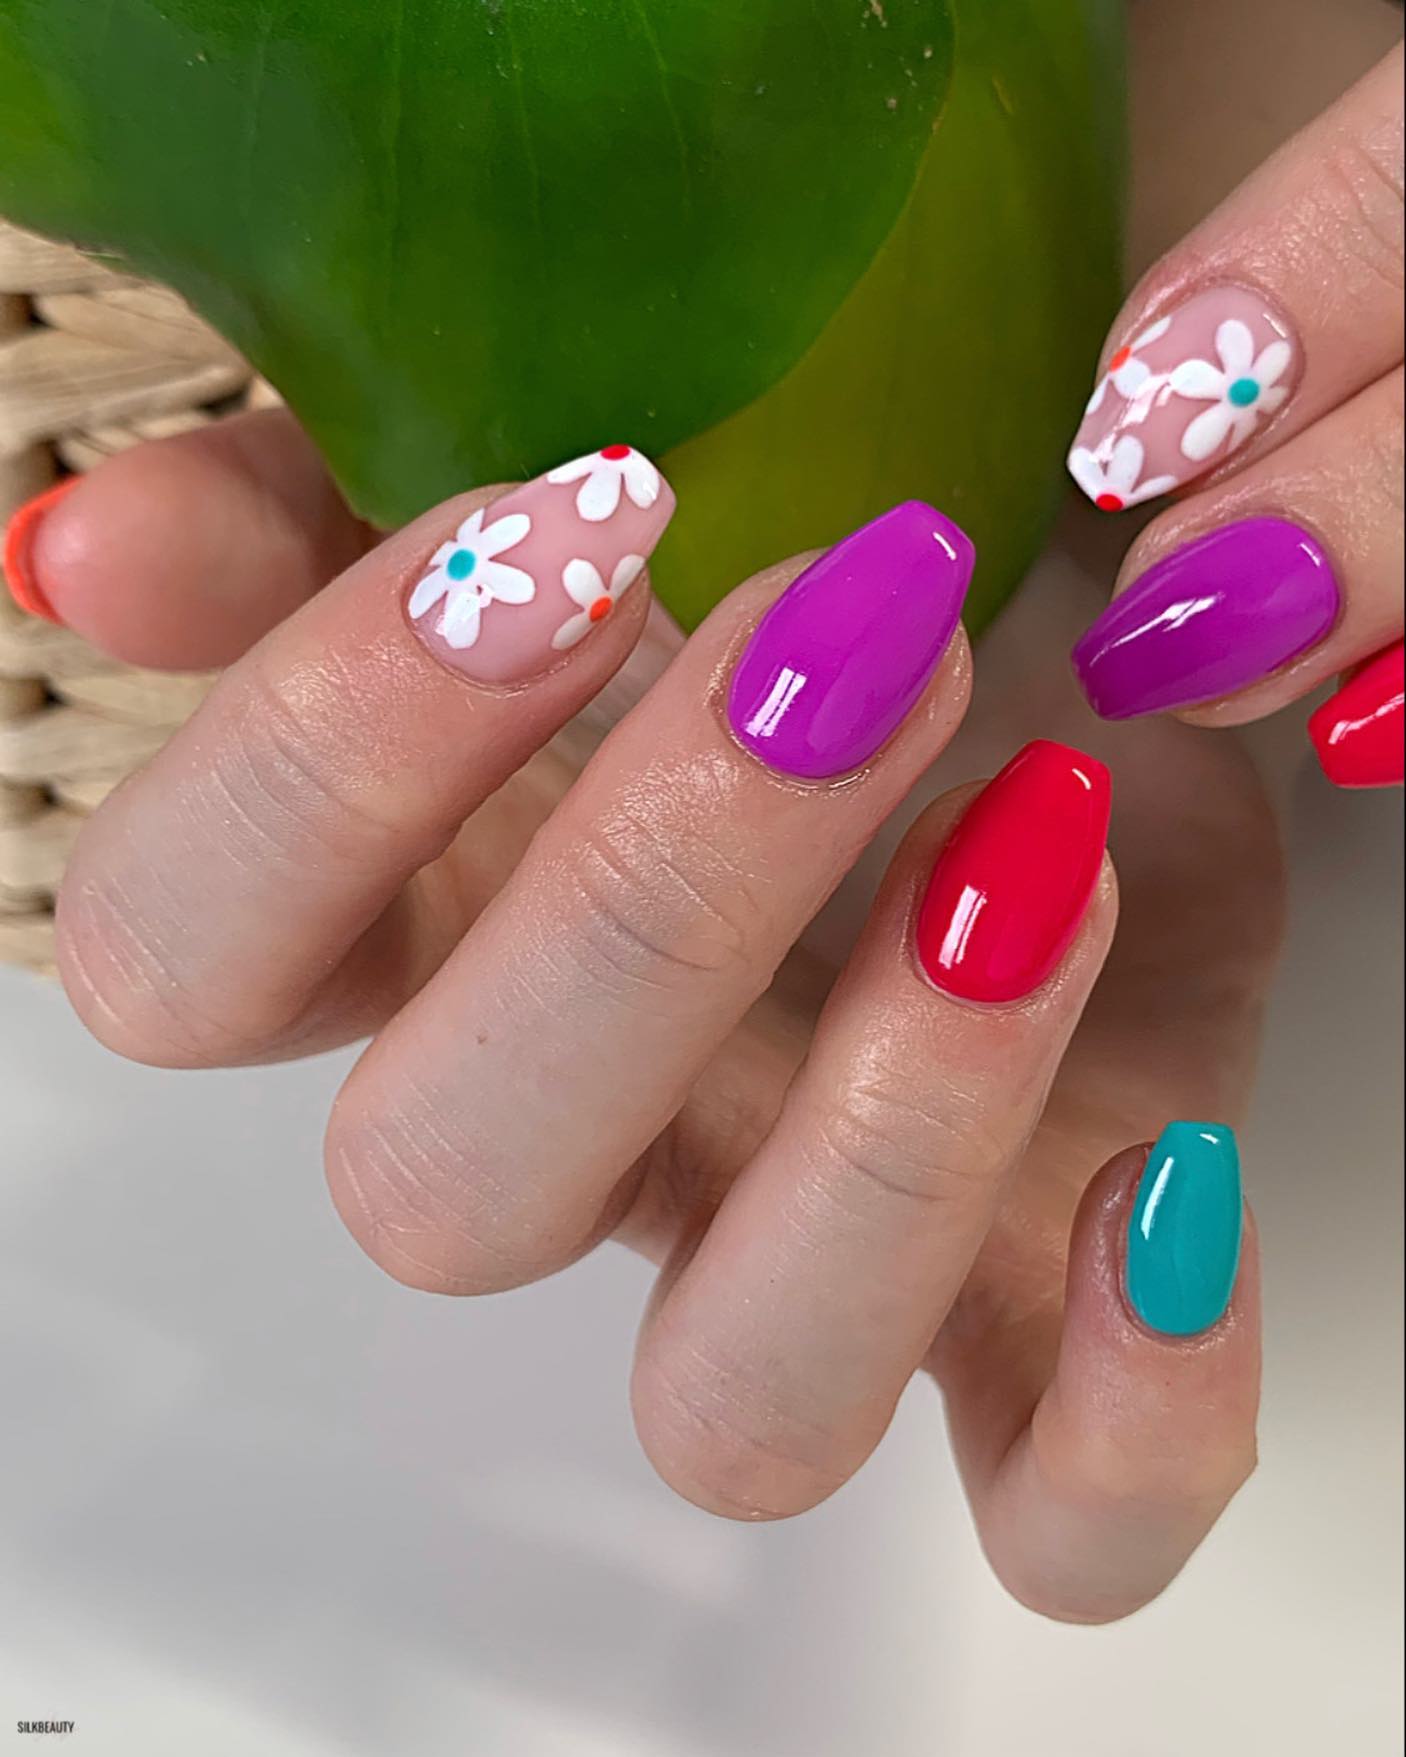 For those who likes colorful floral nail ideas will love these nails! Blue, pink and purple colors are so matching.